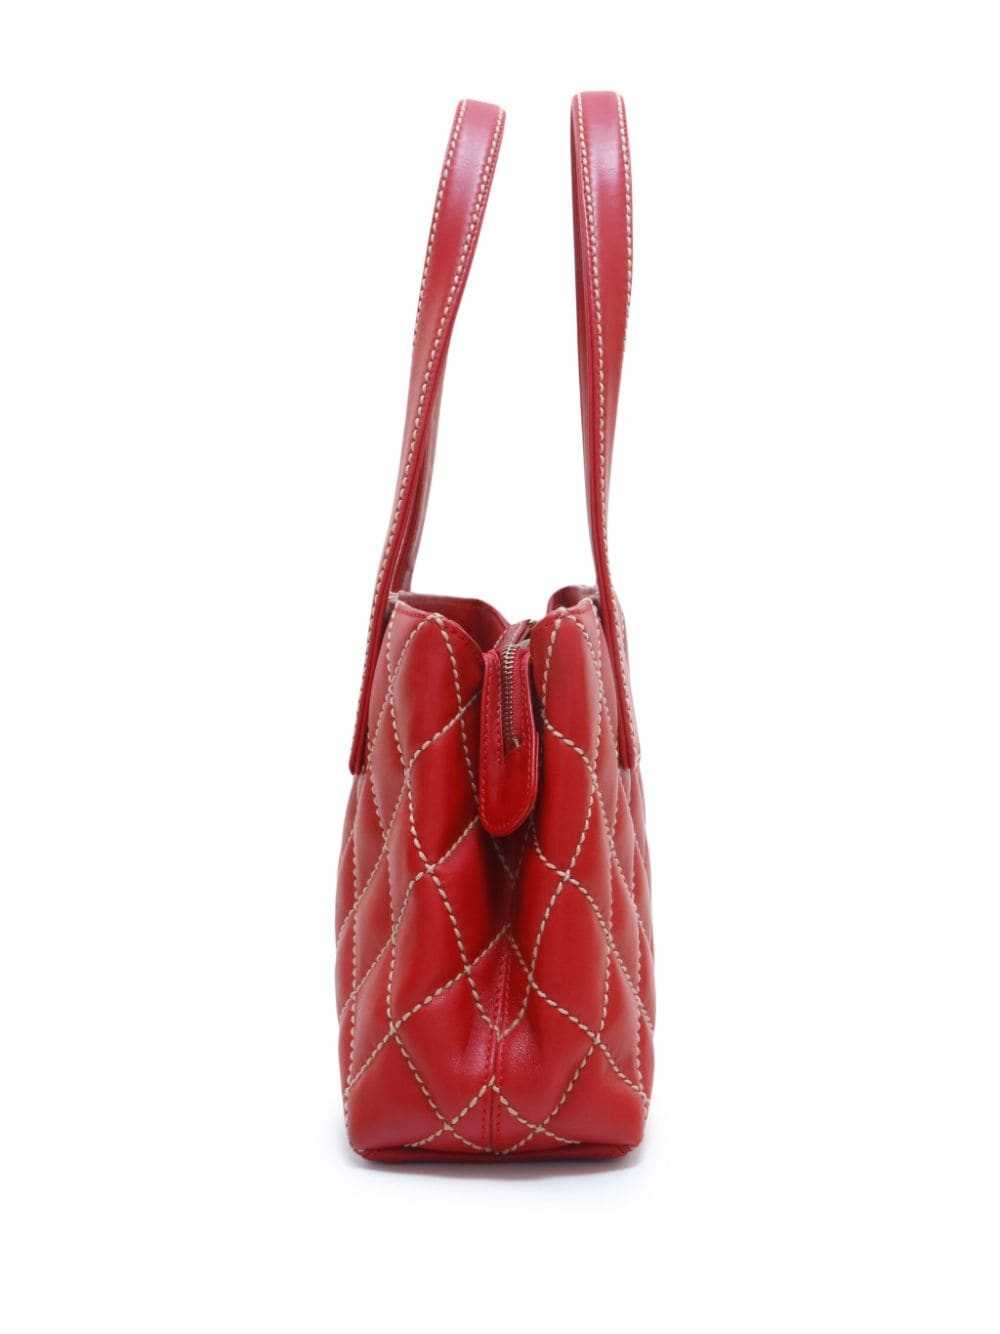 CHANEL Pre-Owned 2002 Wild Stitch tote bag - Red - image 4